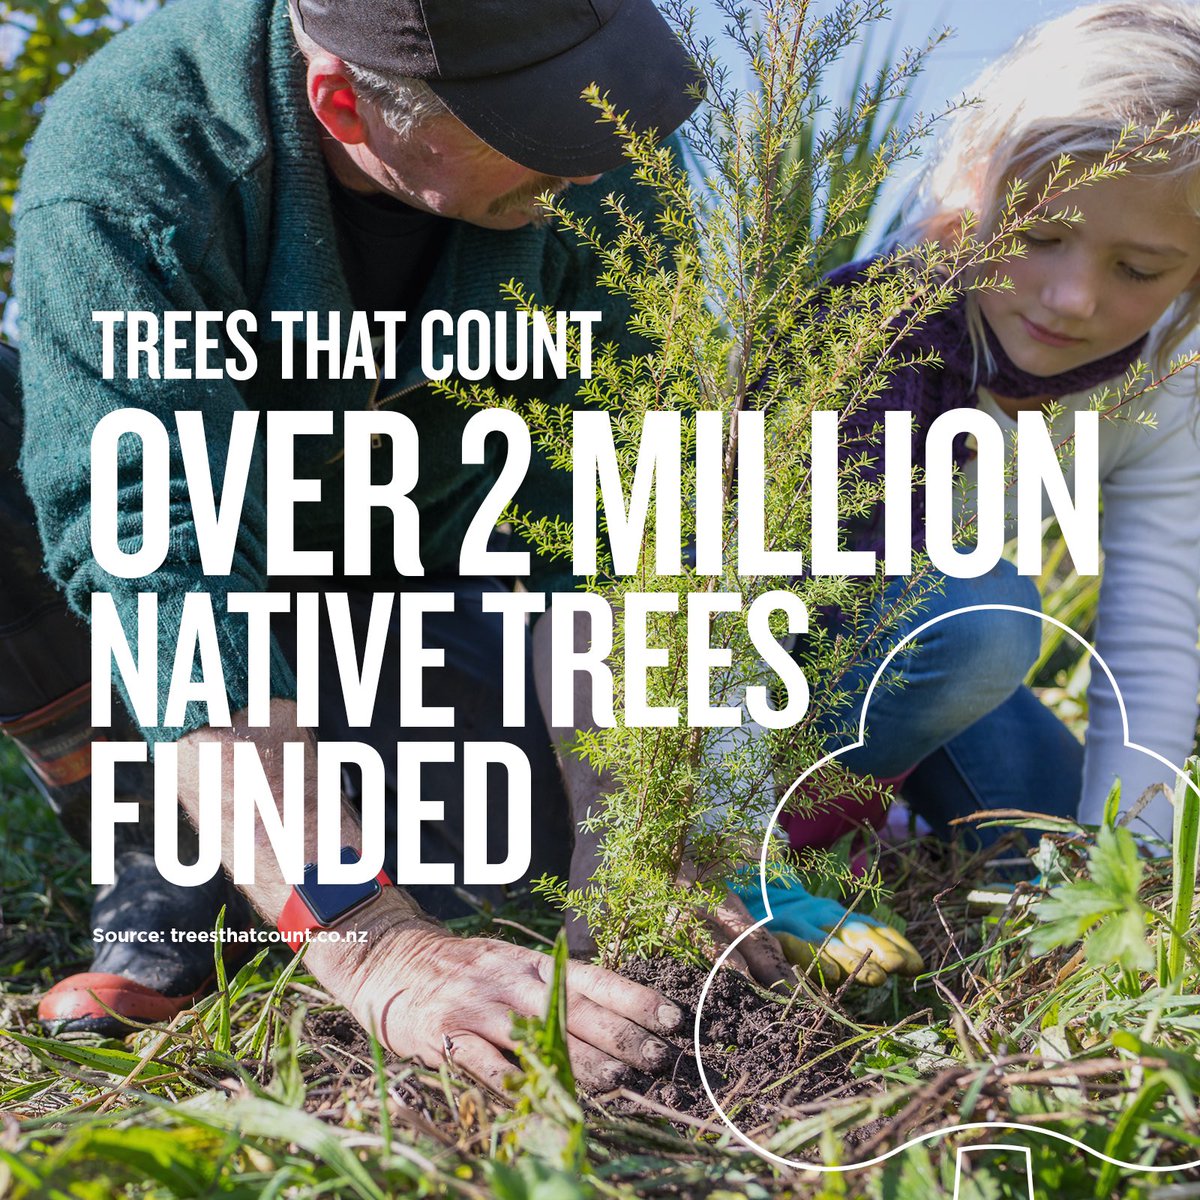 🌲 It's International Day of Forests, and we're proud to recognise @TreesThatCount, an organisation dedicated to helping New Zealanders plant millions of native trees. They have planted over 2,000,000 of them across the country since 2016!   Find out more: nzstory.govt.nz/stories/the-co…